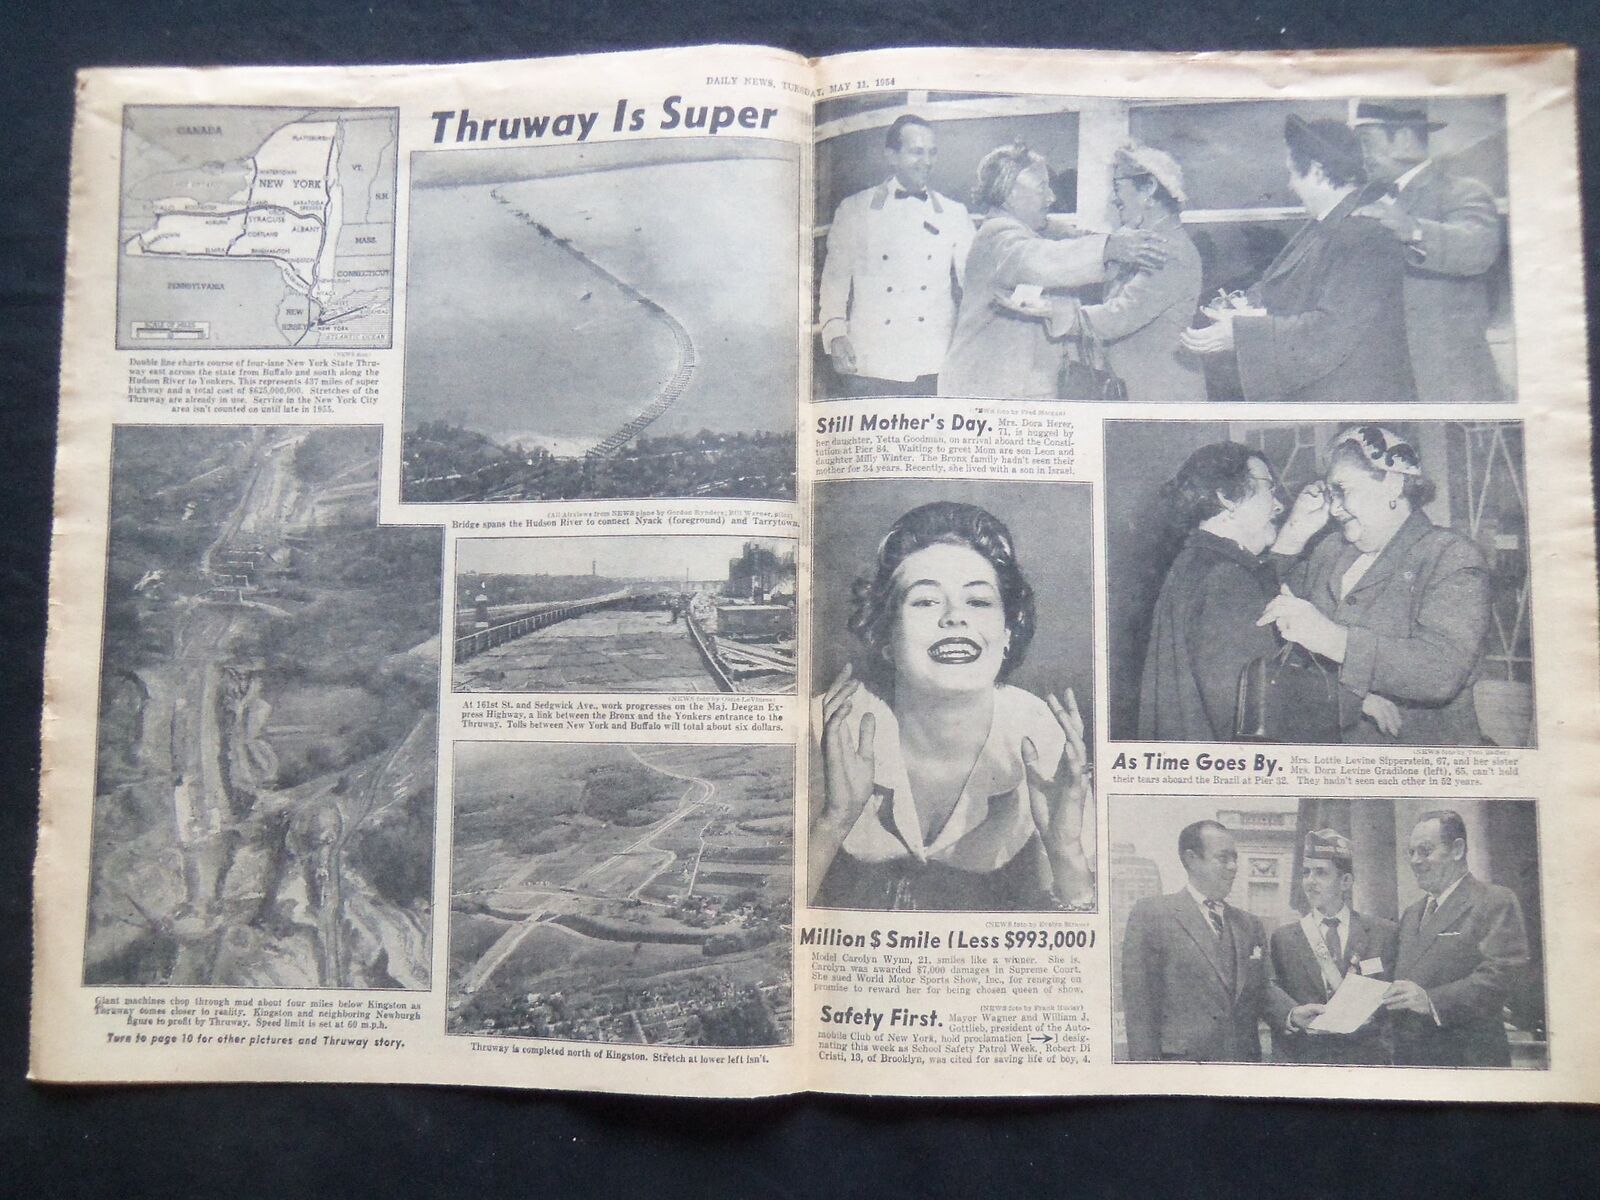 1954 MAY 11 NY DAILY NEWS NEWSPAPER - NY STATE THRUWAY IS SUPER - NP 2514